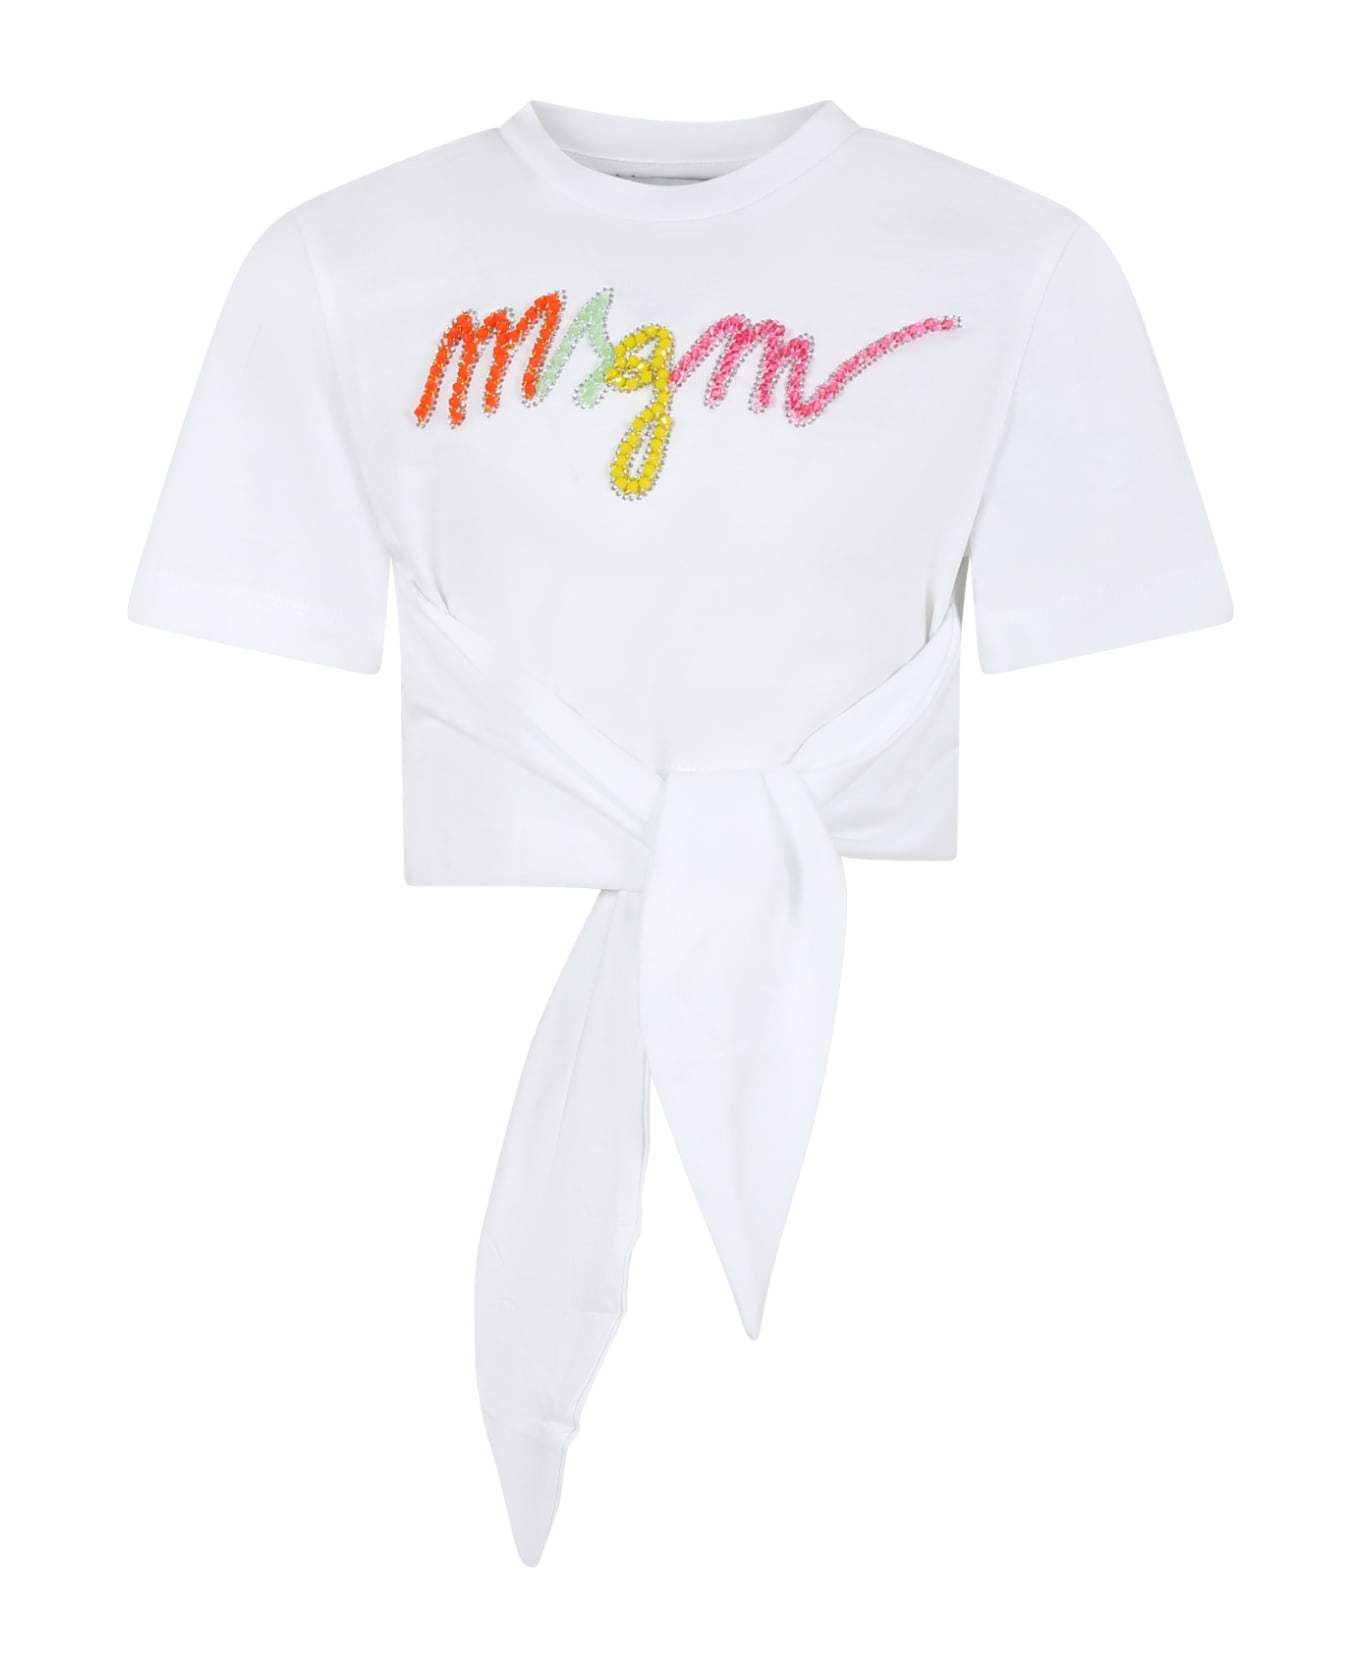 MSGM White T-shirt For Girl With Multicolor Logo - White